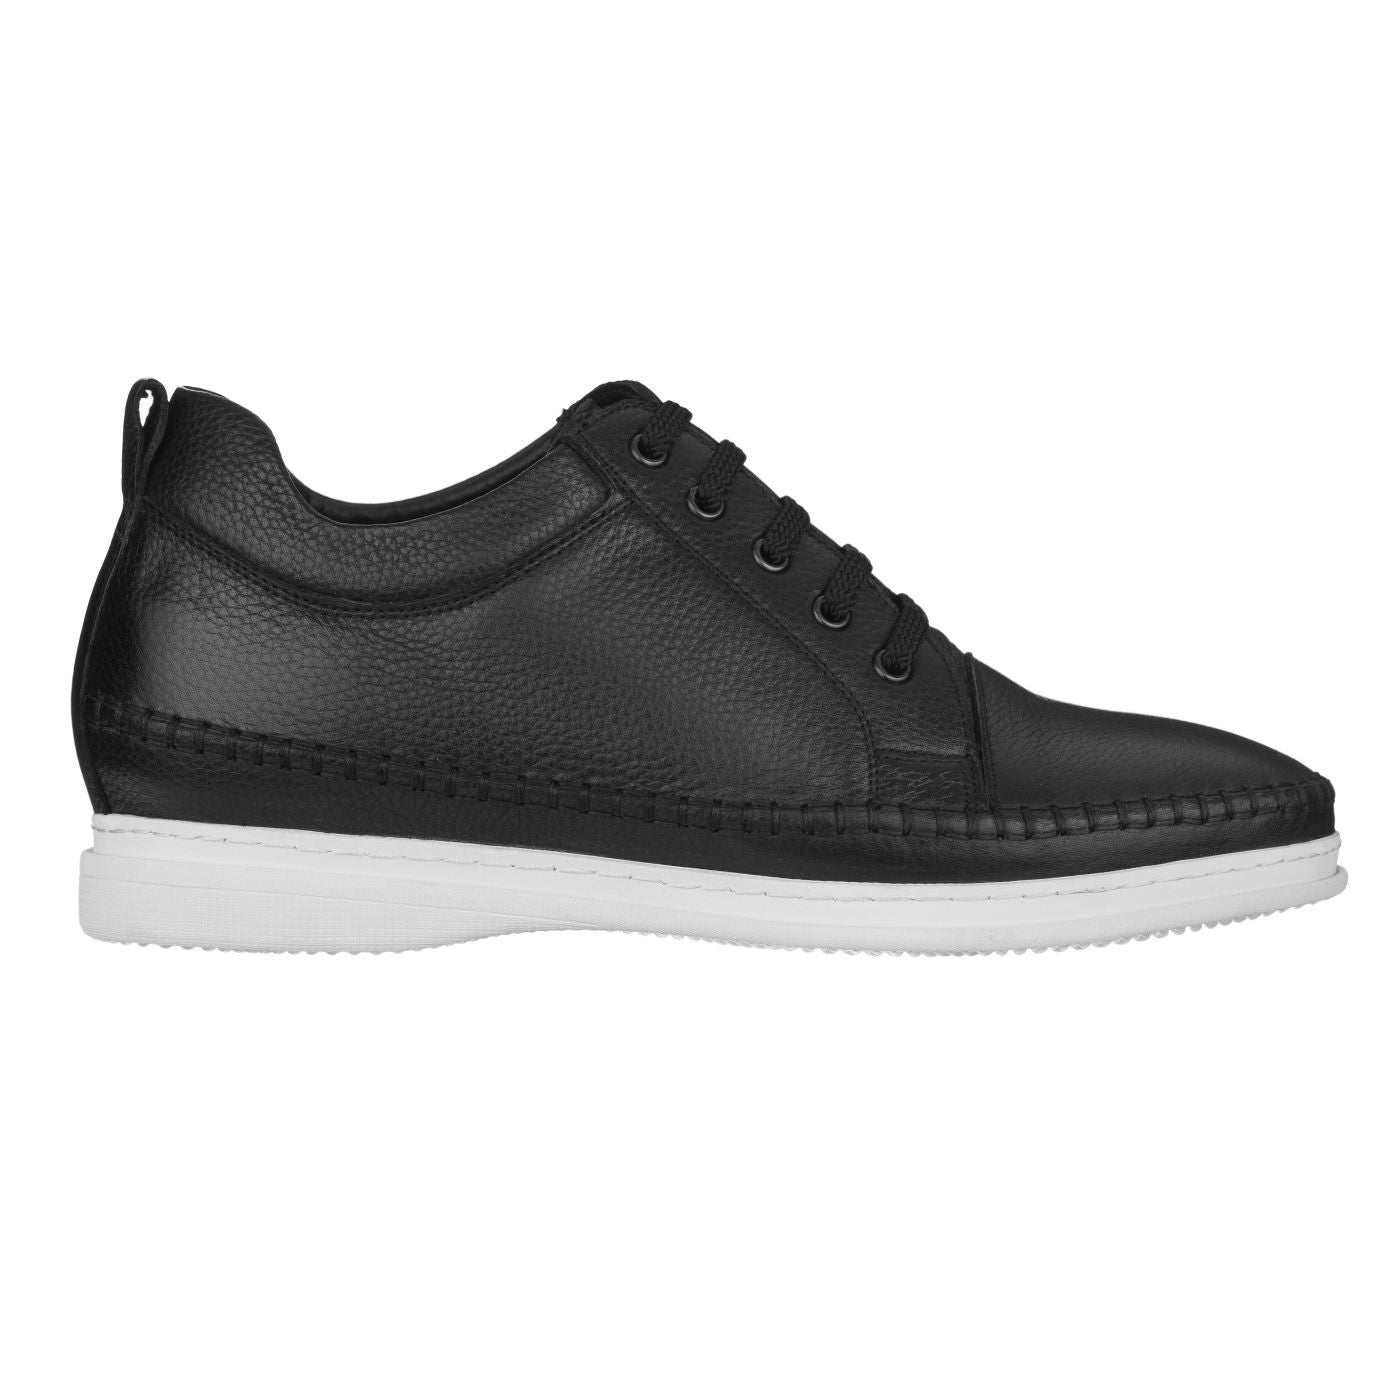 Elevator shoes height increase CALTO 3 Inch Casual Leather Elevator Sneakers - Black - S4311